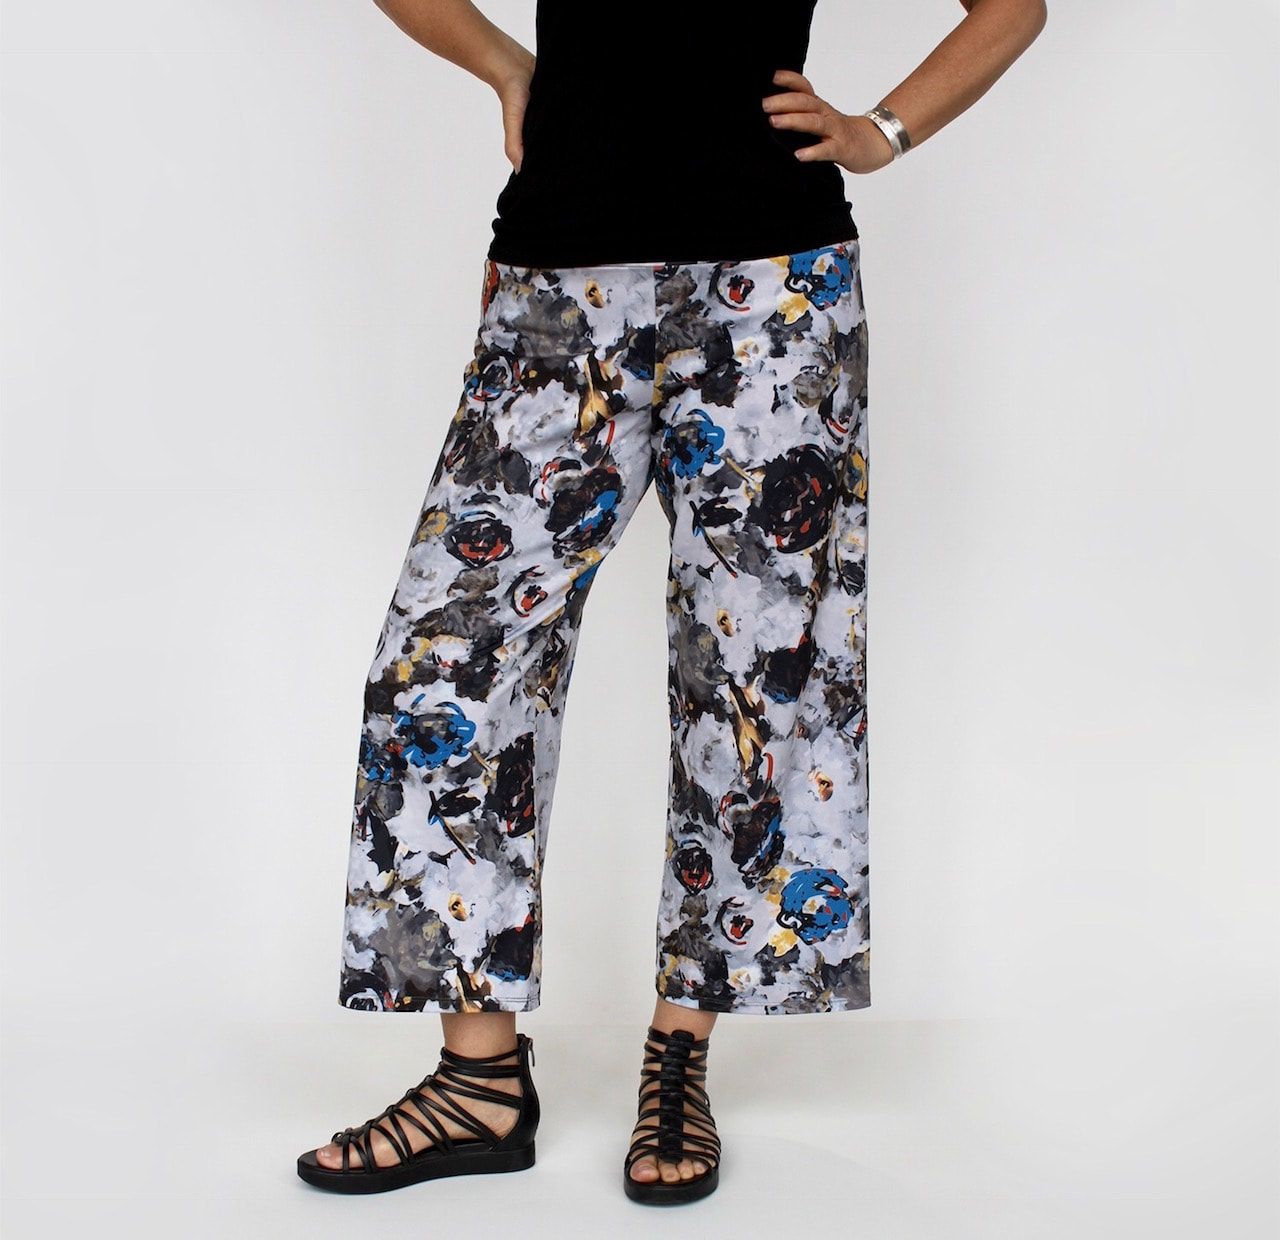 Women's wide leg capri pant in abstract floral print stretch knit